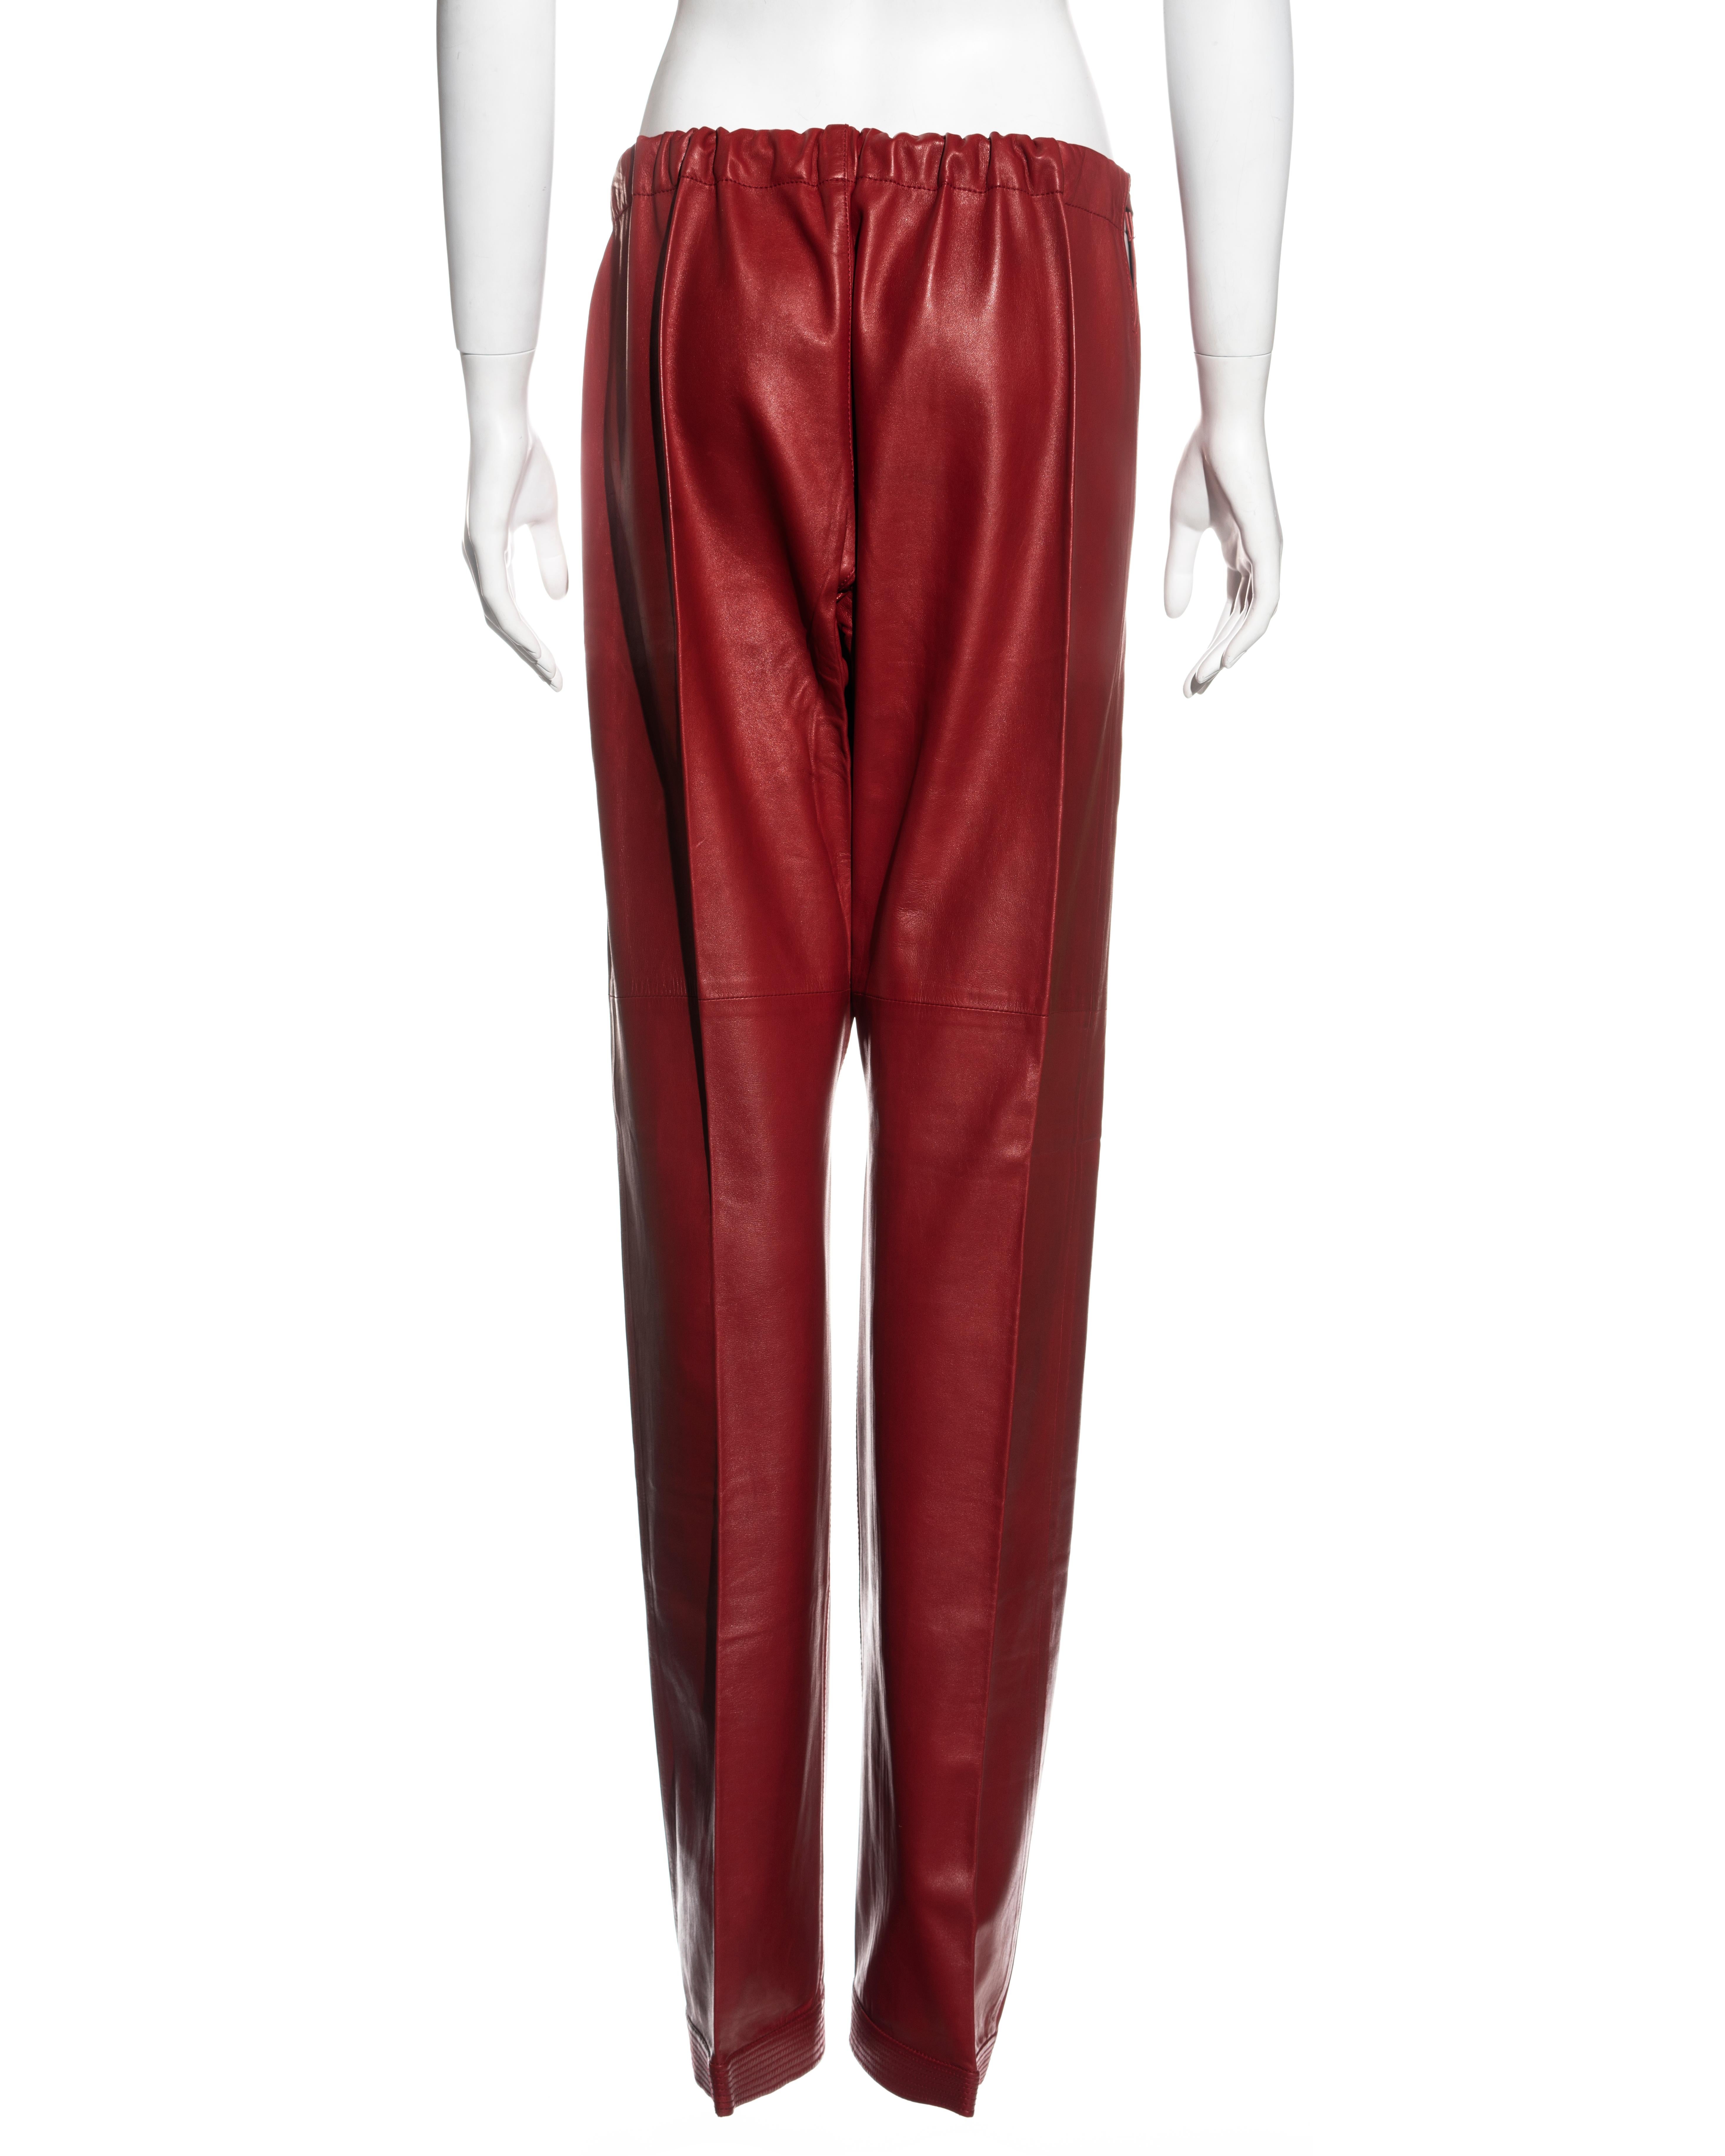 Gucci by Tom Ford red lambskin leather wide leg drawstring pants, ss 2001 For Sale 1